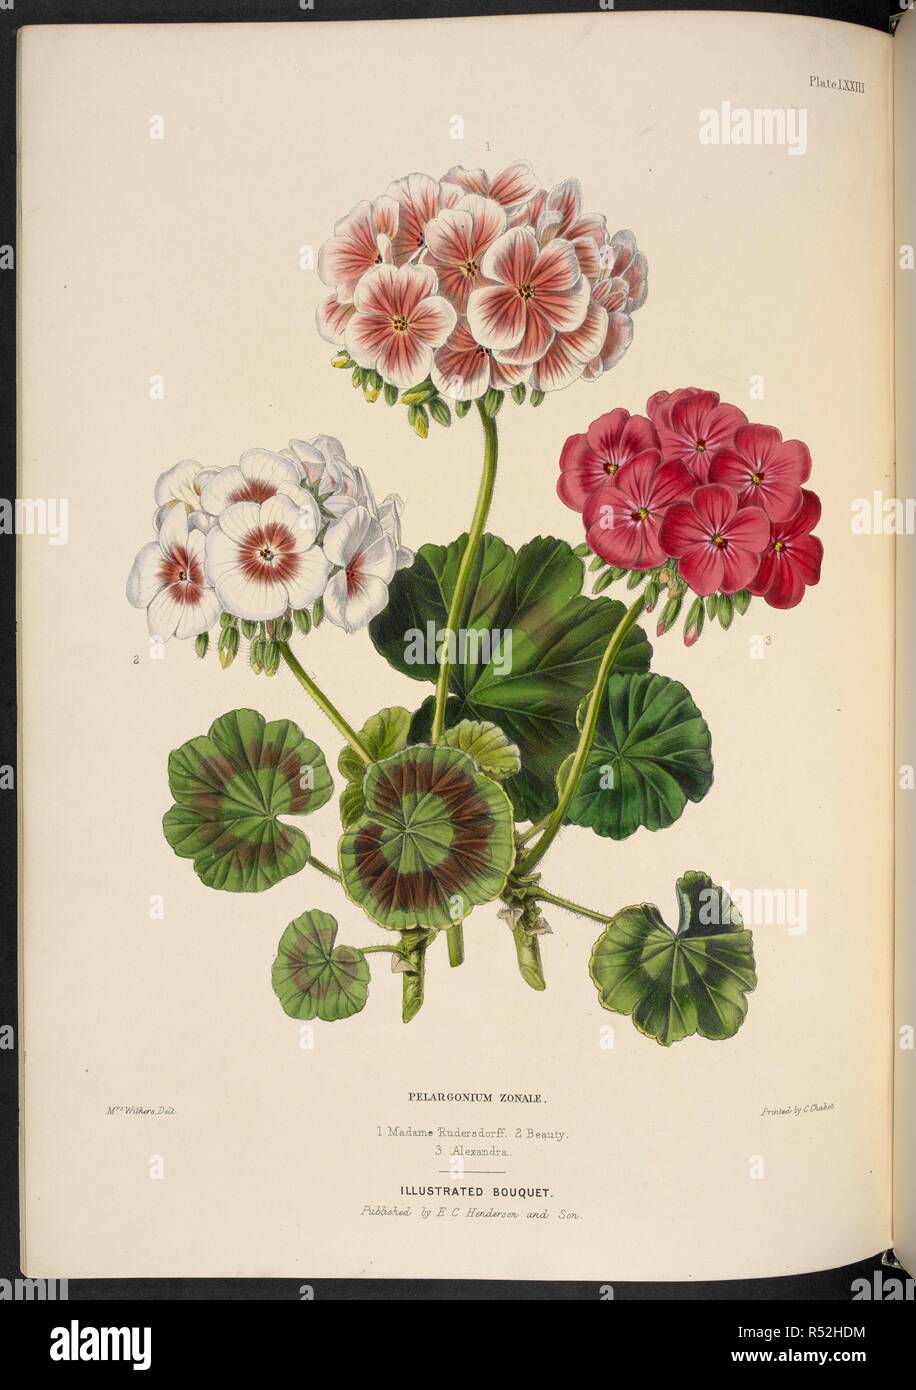 New bedding Pelargoniums. Pelargonium zonale. 1. Madame Rudersdorff; 2. Beauty; 3. Alexandra. The Illustrated Bouquet, consisting of figures, with descriptions of new flowers. London, 1857-64. Source: 1823.c.13 plate 73. Author: Henderson, Edward George. Withers, Mrs. Stock Photo